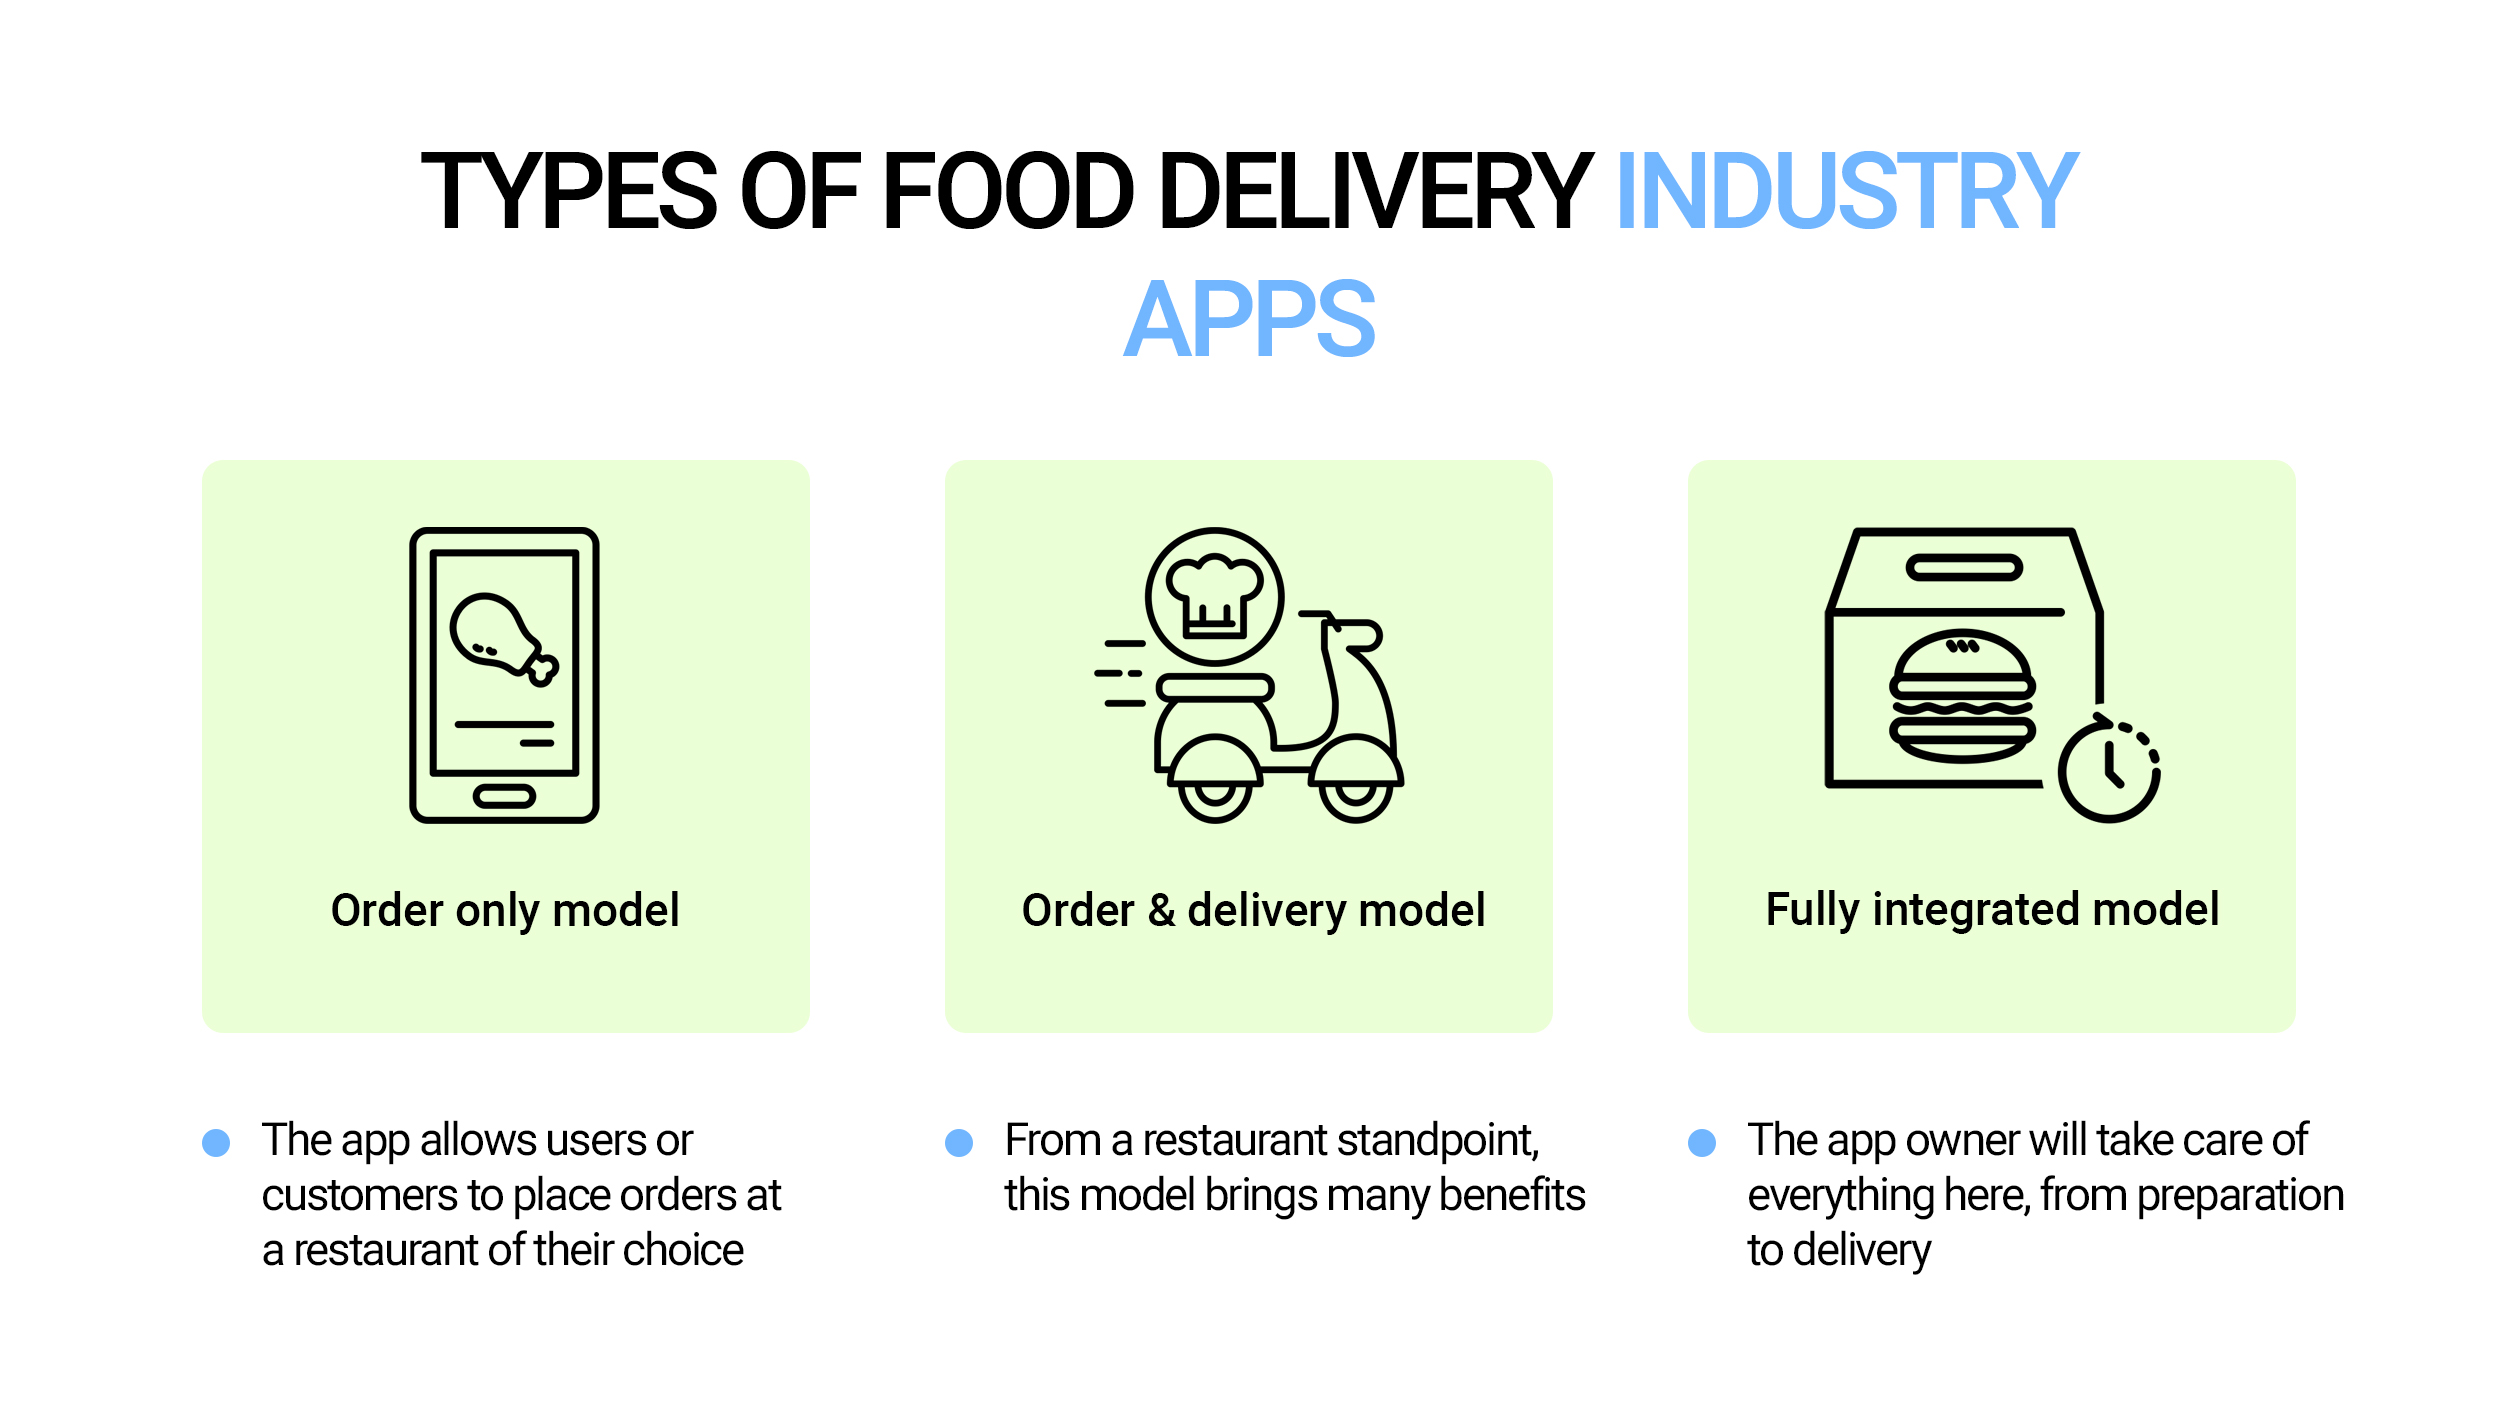 Types of food delivery apps